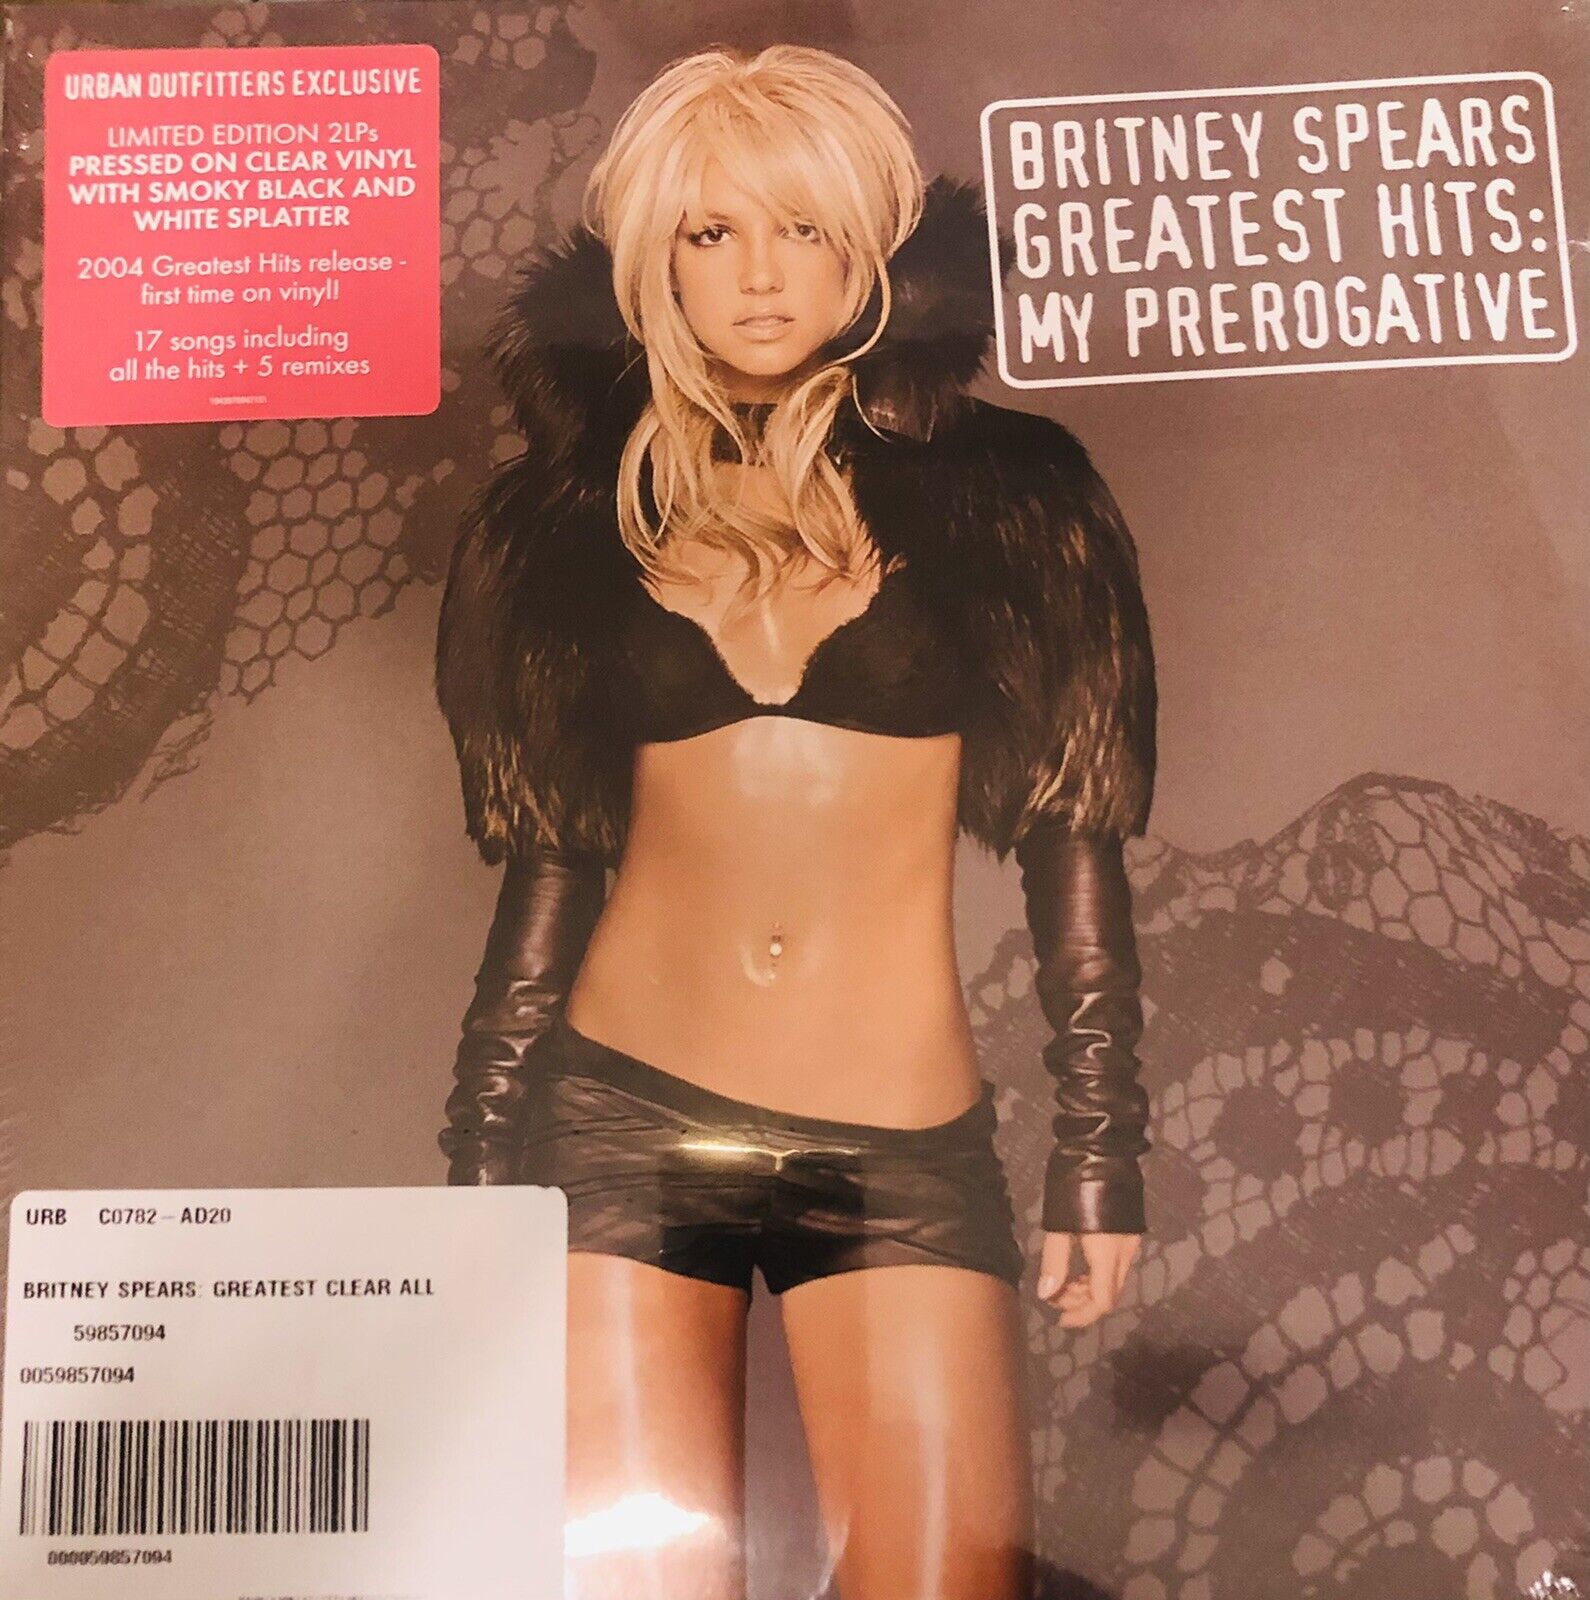 Britney Spears Greatest Hits LP- My Prerogative URBAN OUTFITTERS EXCLUSIVE Vinyl